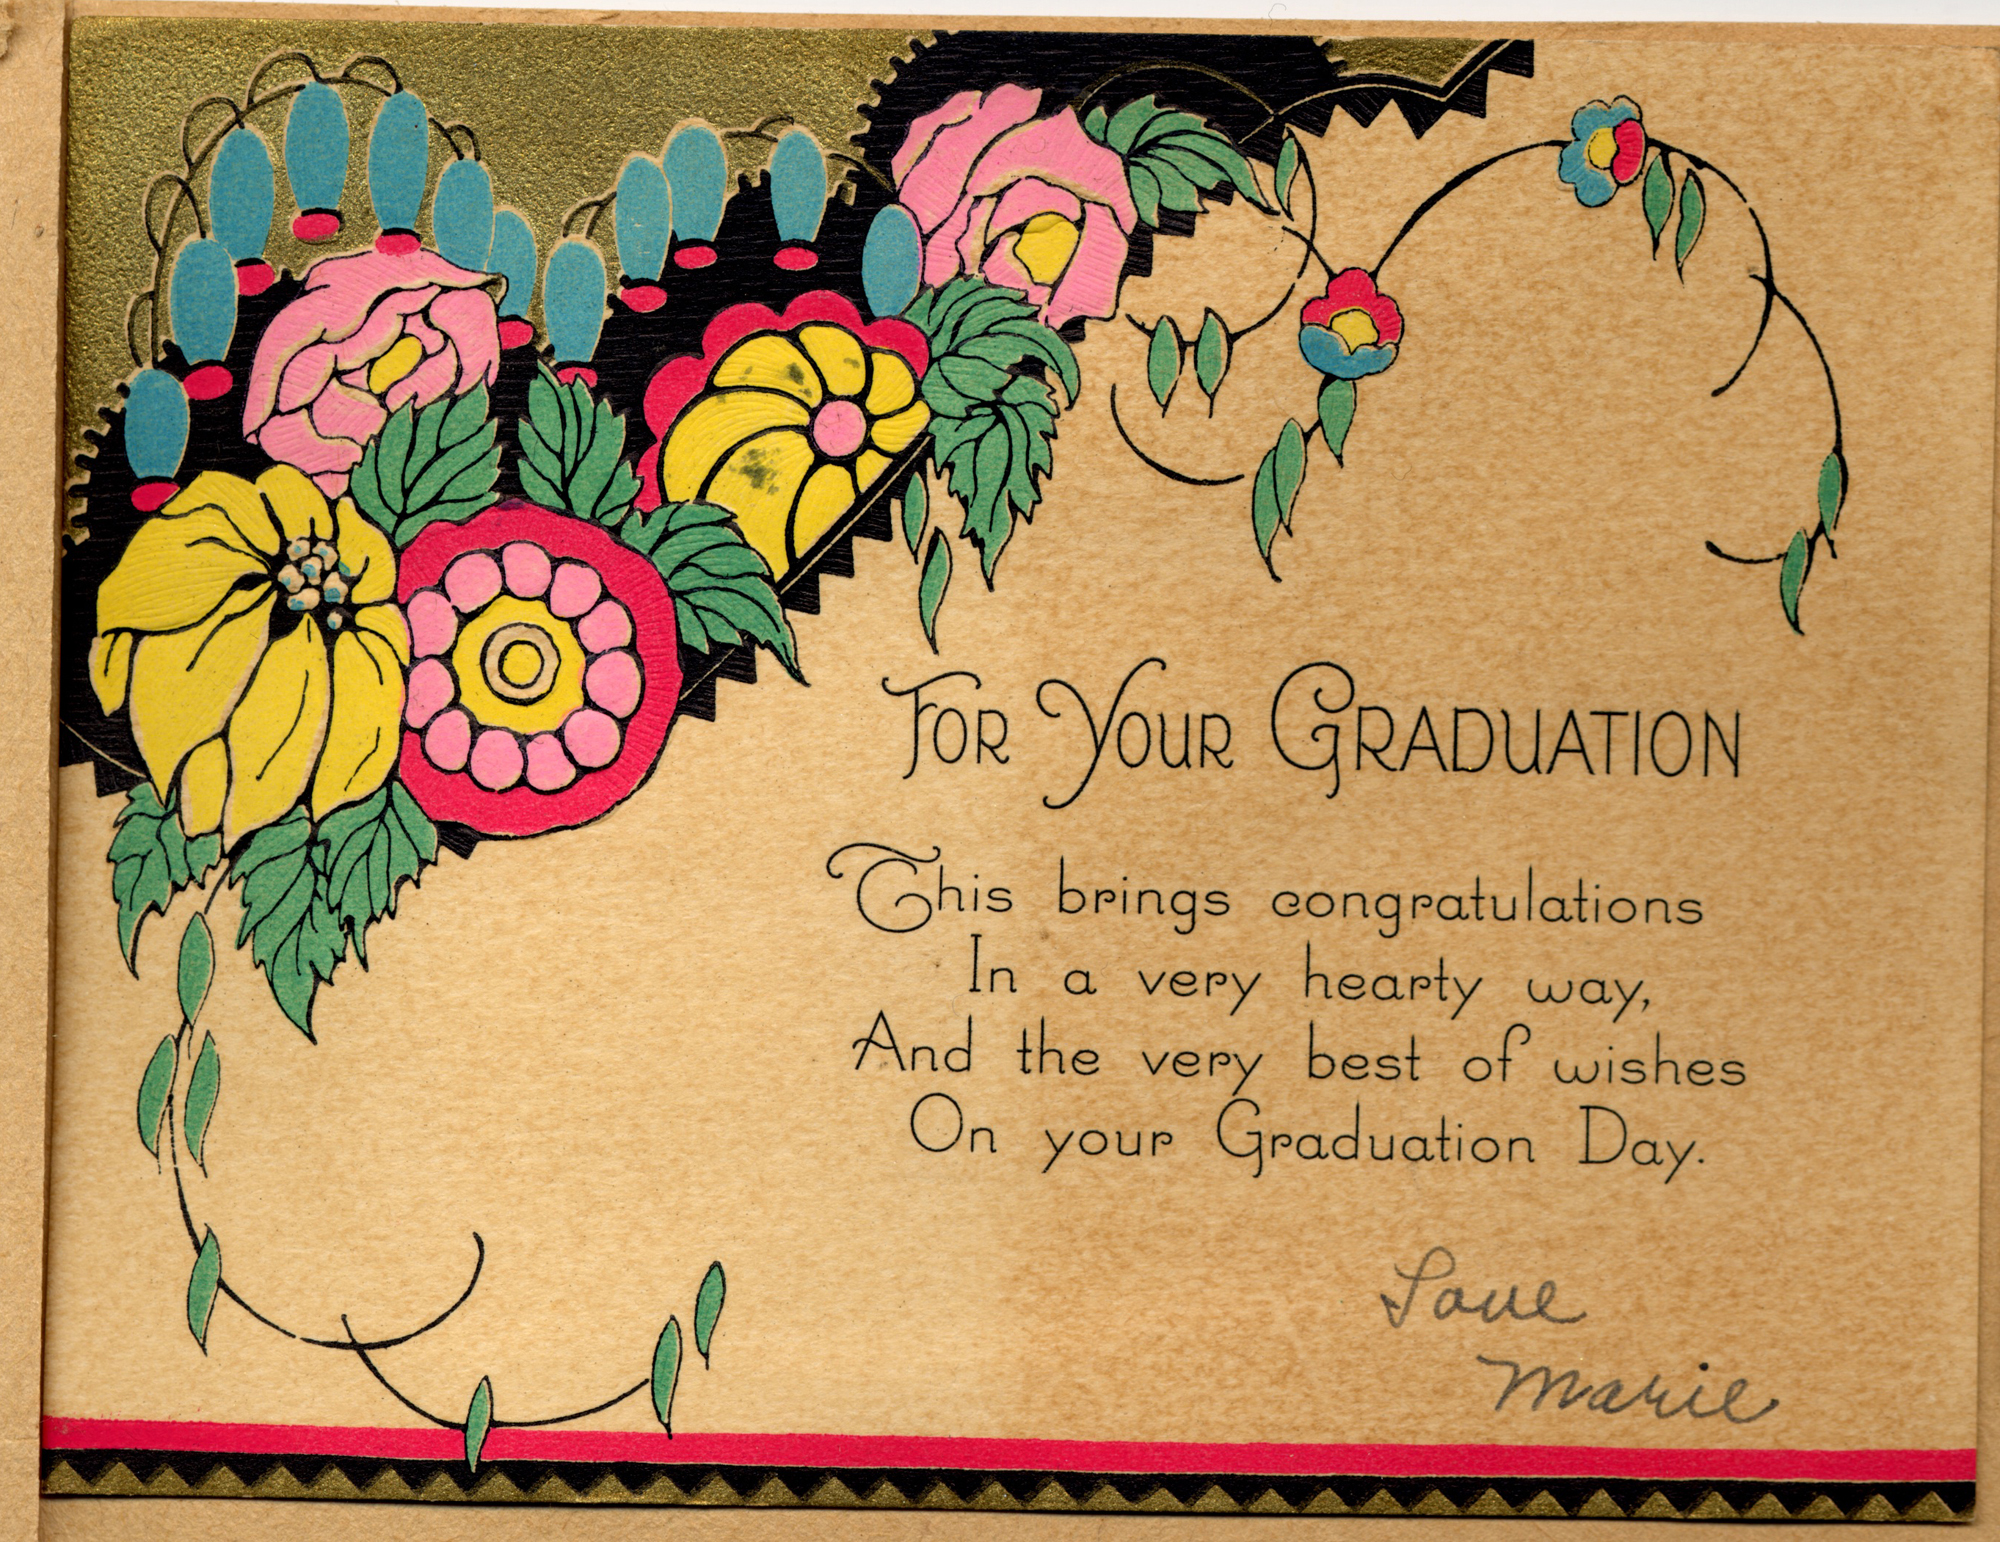 3D Graduation Greeting Card with Envelope Pop Up Graduation Cards Graduation Congratulation Card Graduation Gifts Greeting Cards